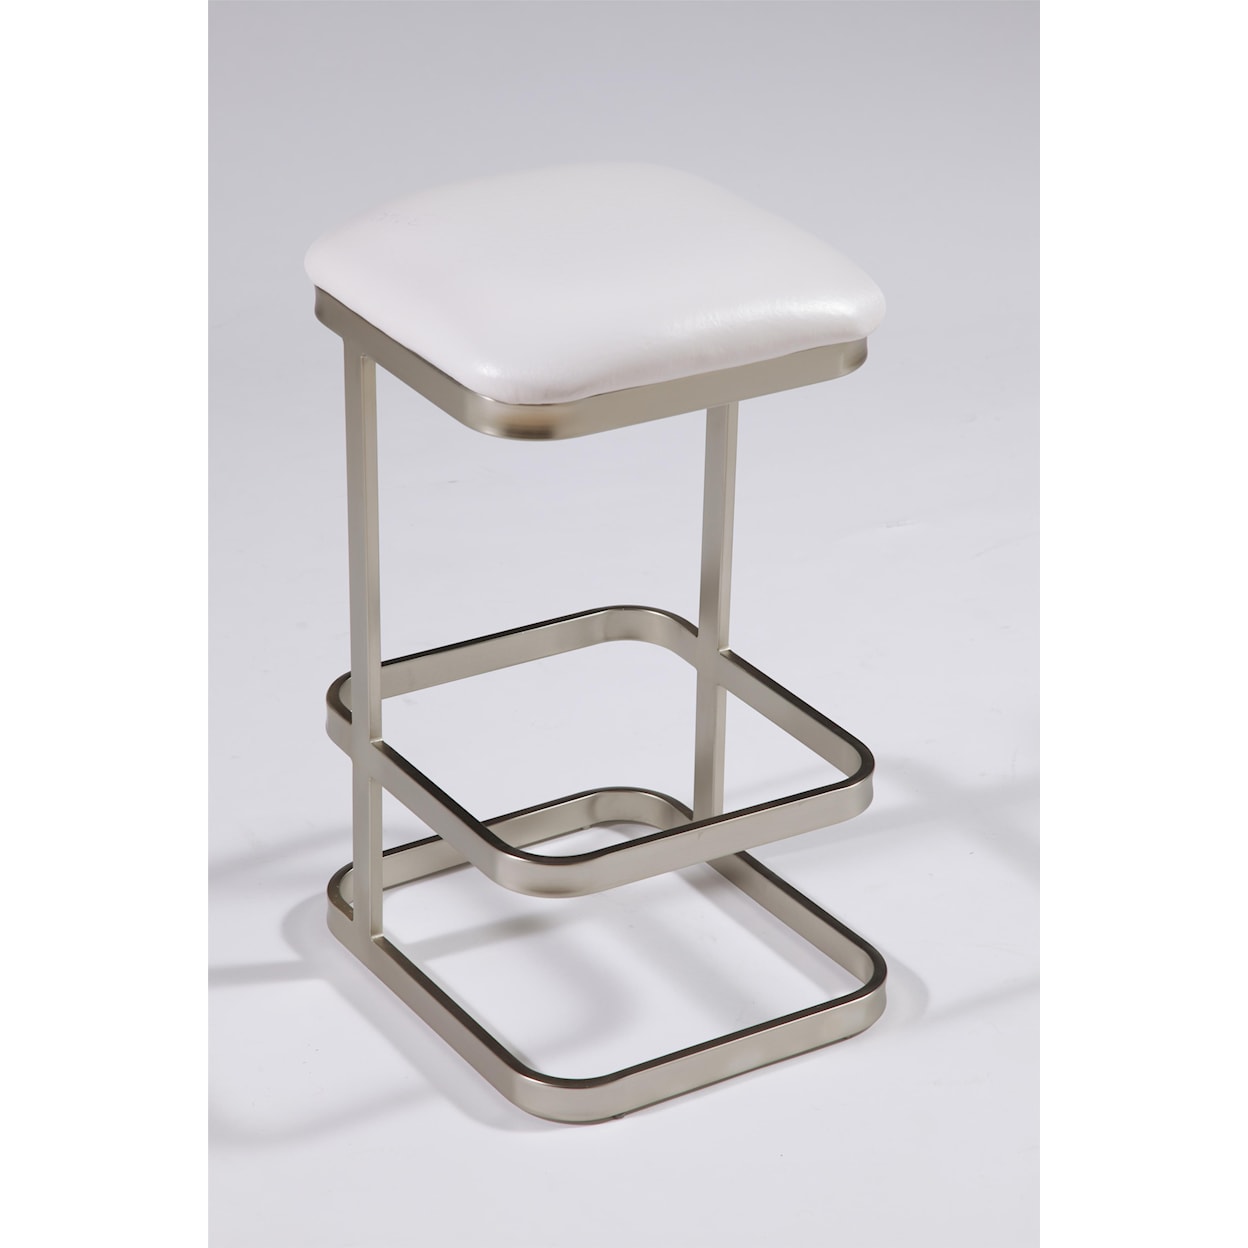 Chintaly Imports Stools  26" Backless Square Seat Counter Stool